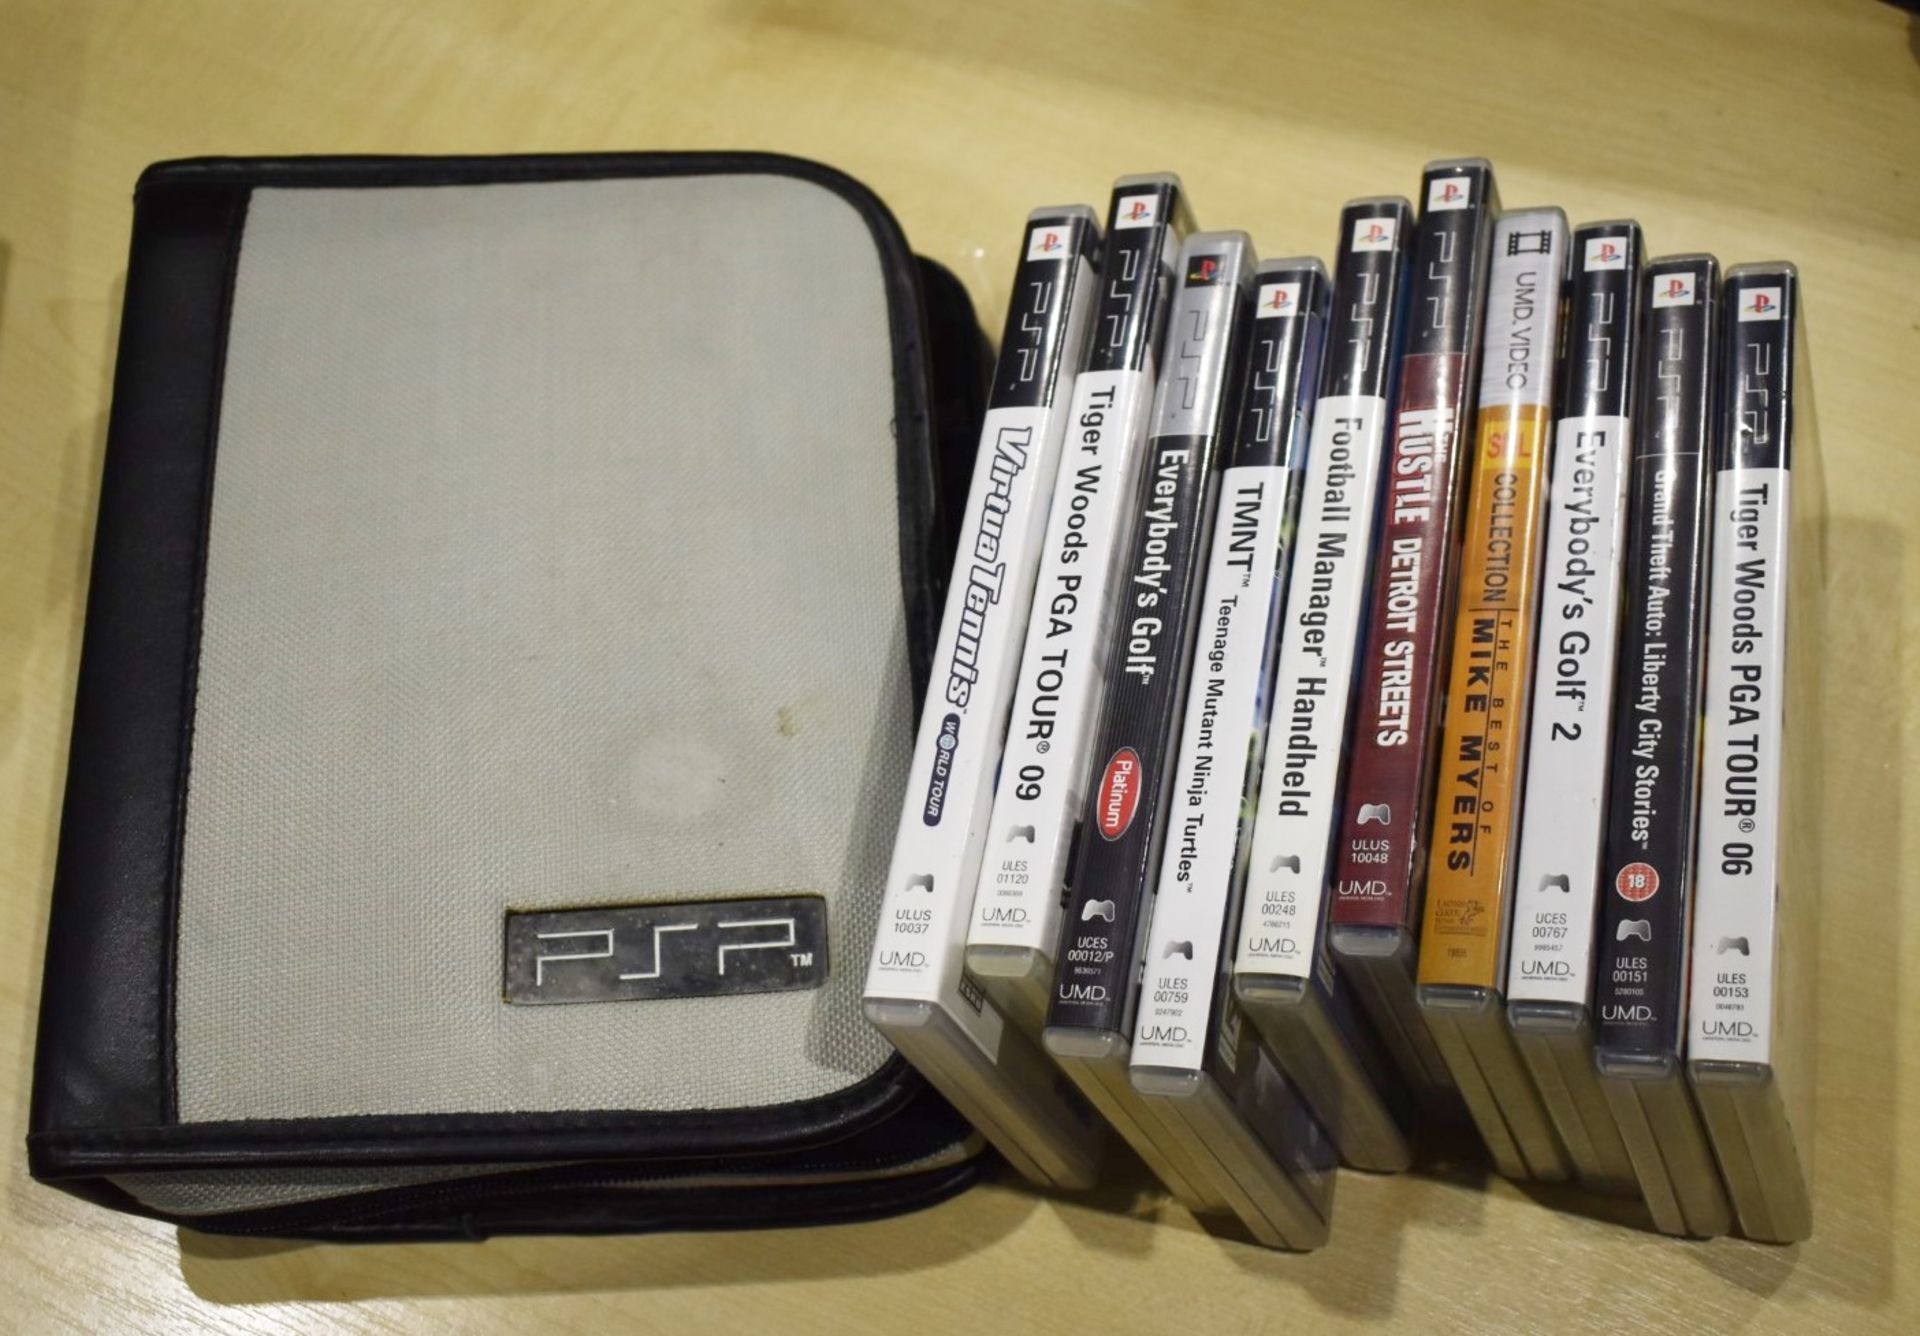 Assorted Lot of Sony PSP Handheld Games Console Games and Films - Includes 18 Games and Films Plus - Image 12 of 14